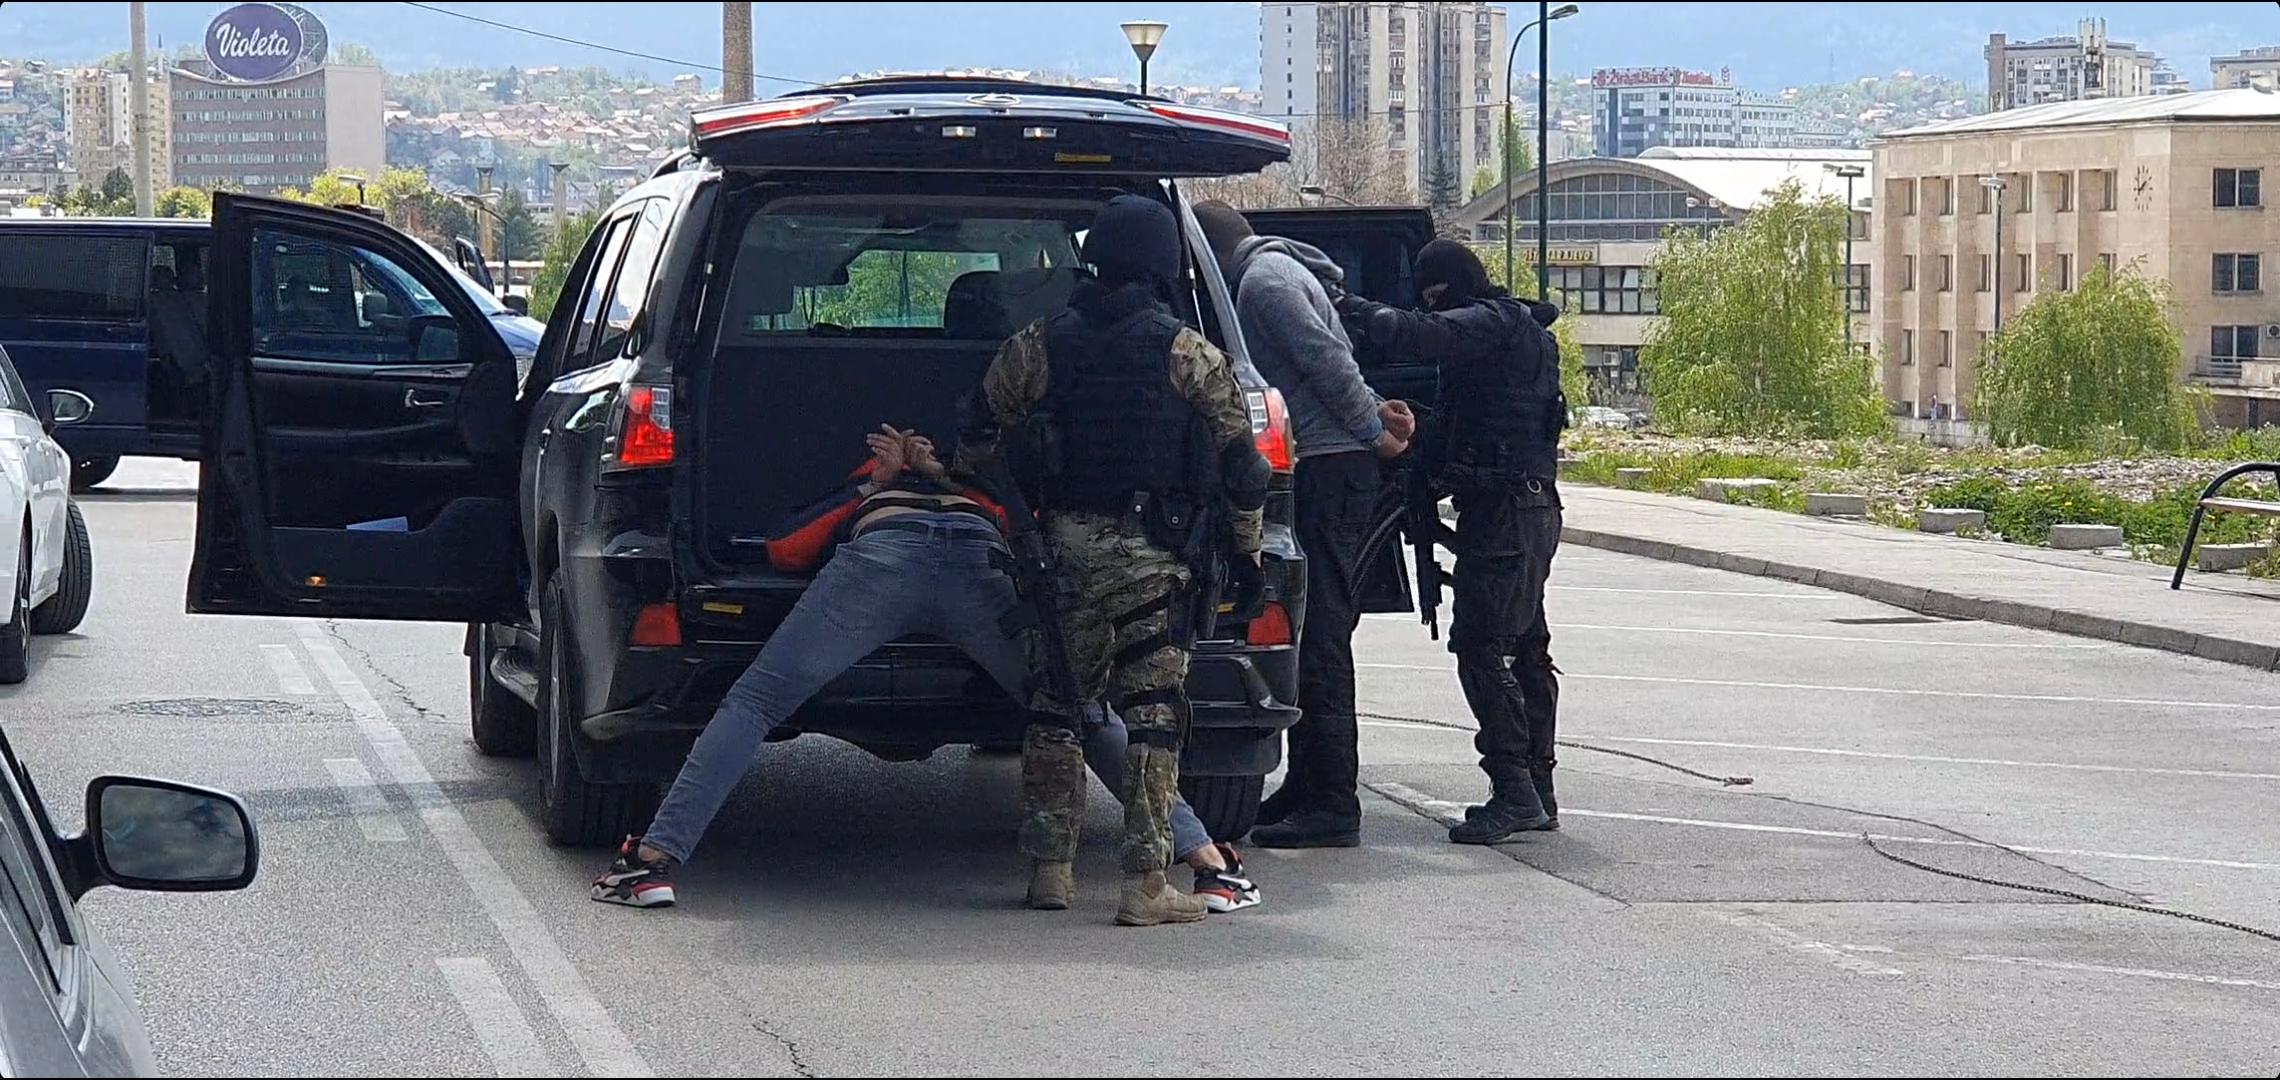 SC Ministry of Interior on arrest in front of "Avaz Twist Tower": Pistol and ammunition confiscated from P. S., six people previously known to the police were controlled